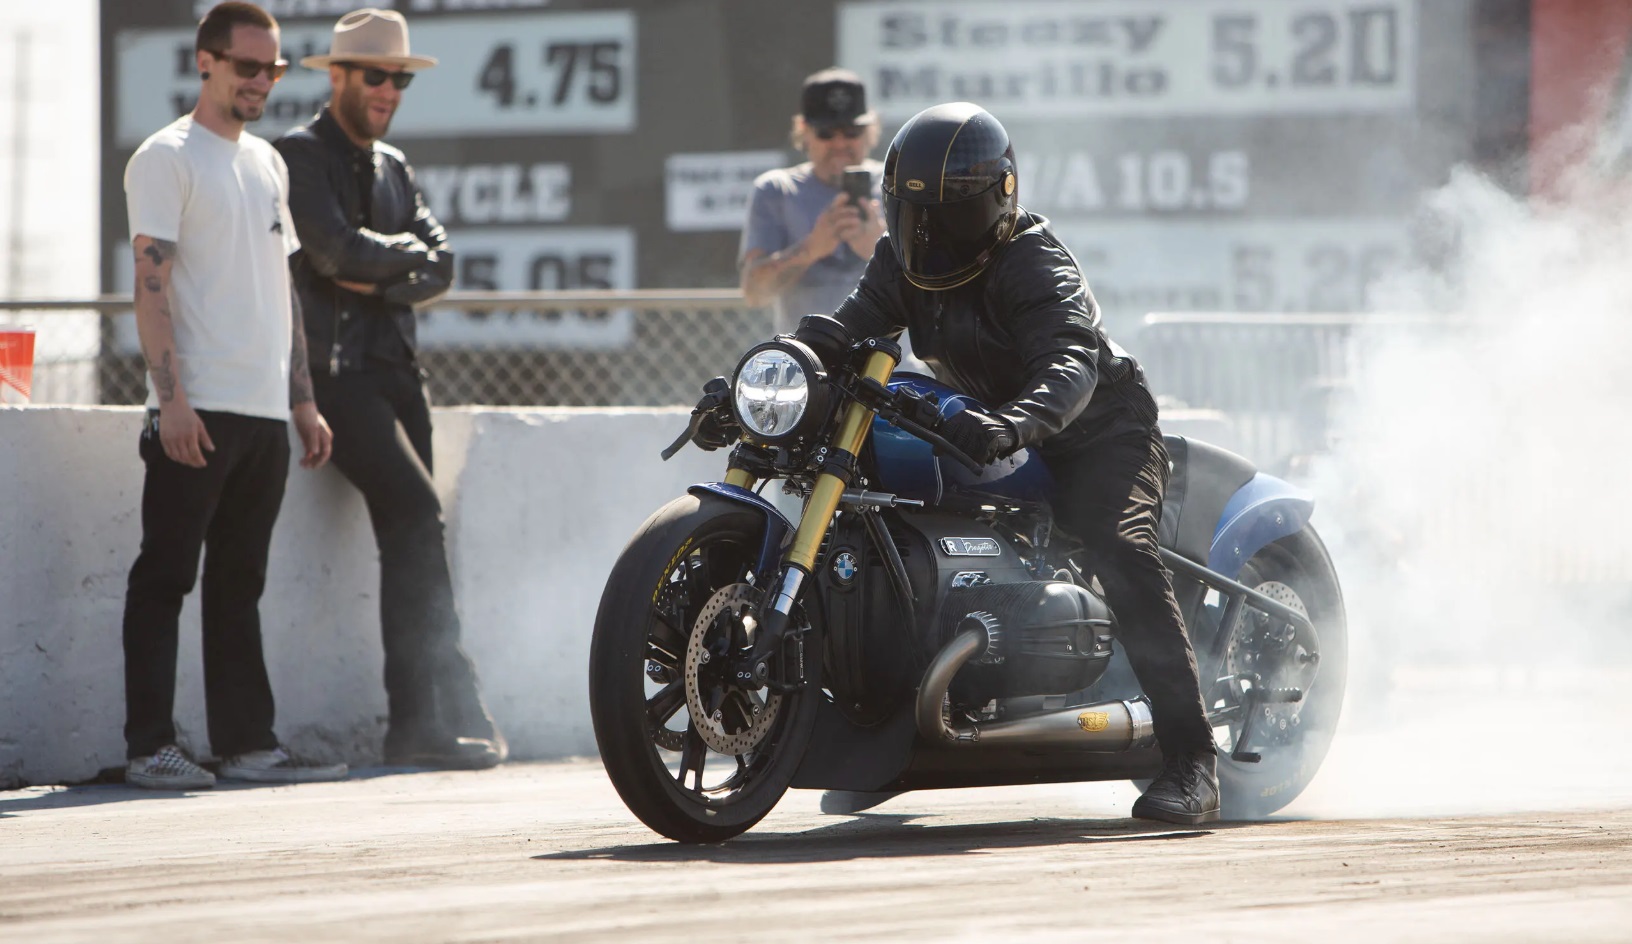 The BMW R18 Dragster Is The Kind Of Buff Race Bike You Dream About